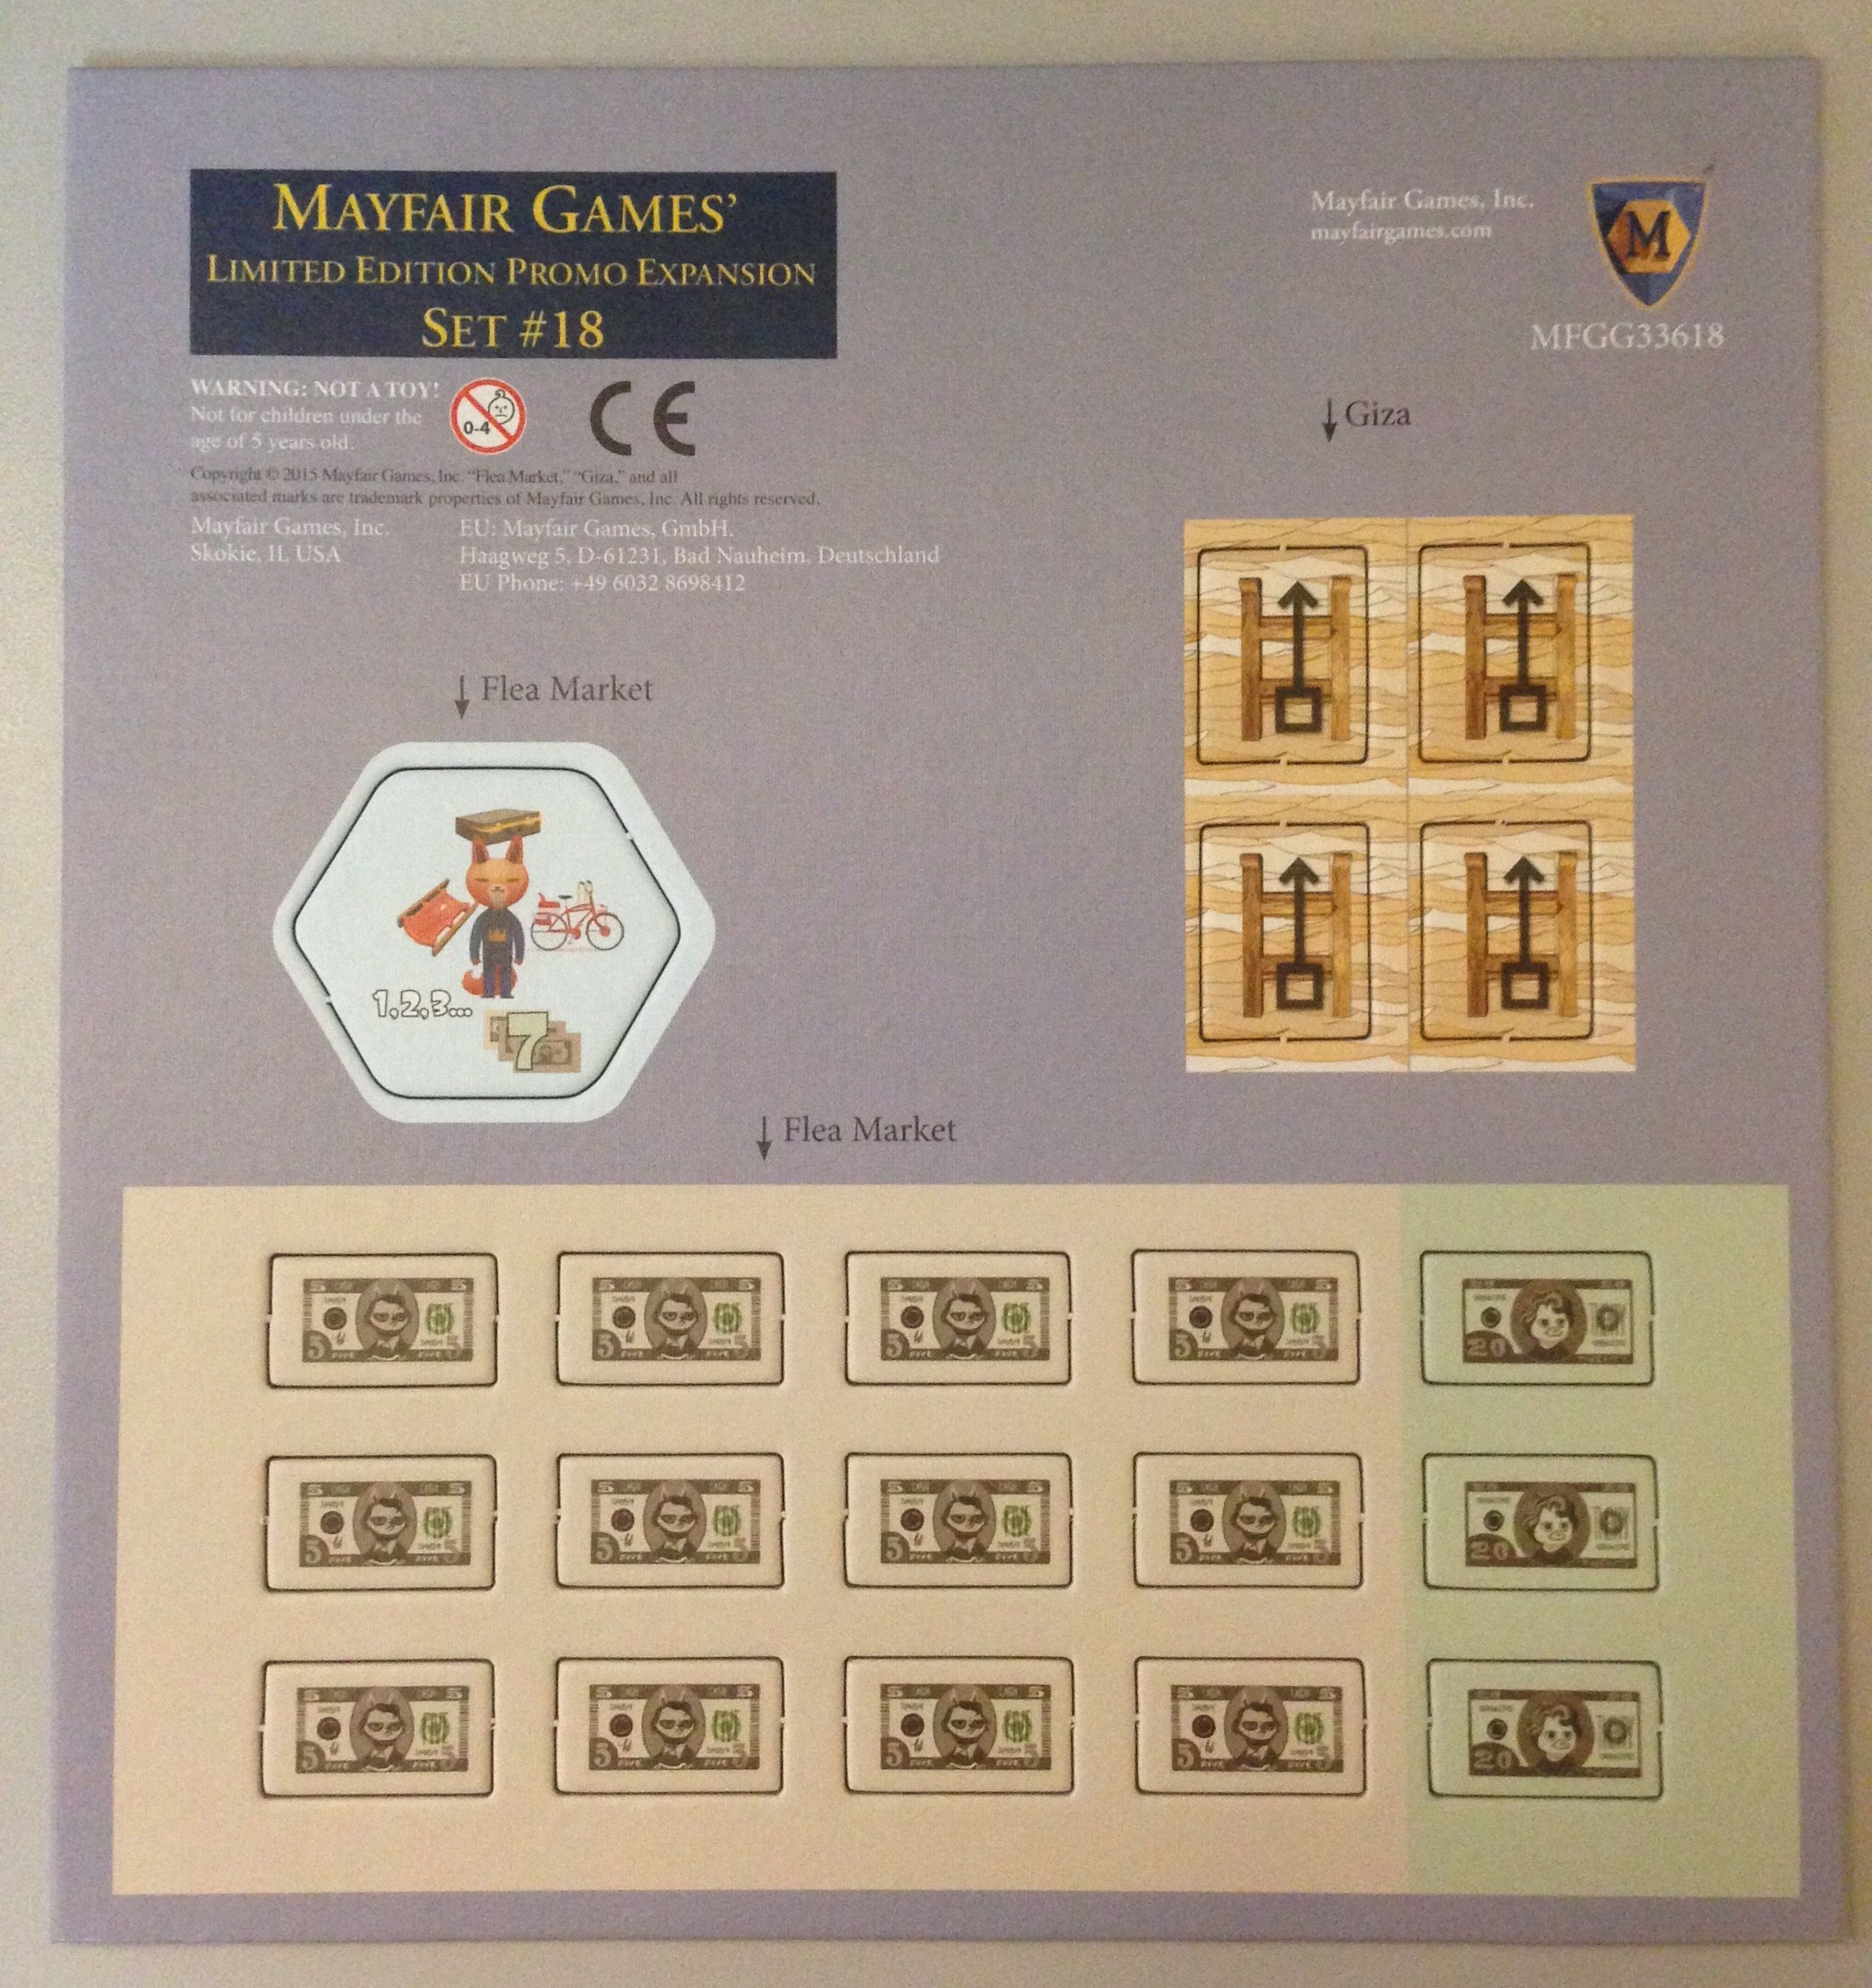 Mayfair Games' Limited Edition Promo Expansion Set #18